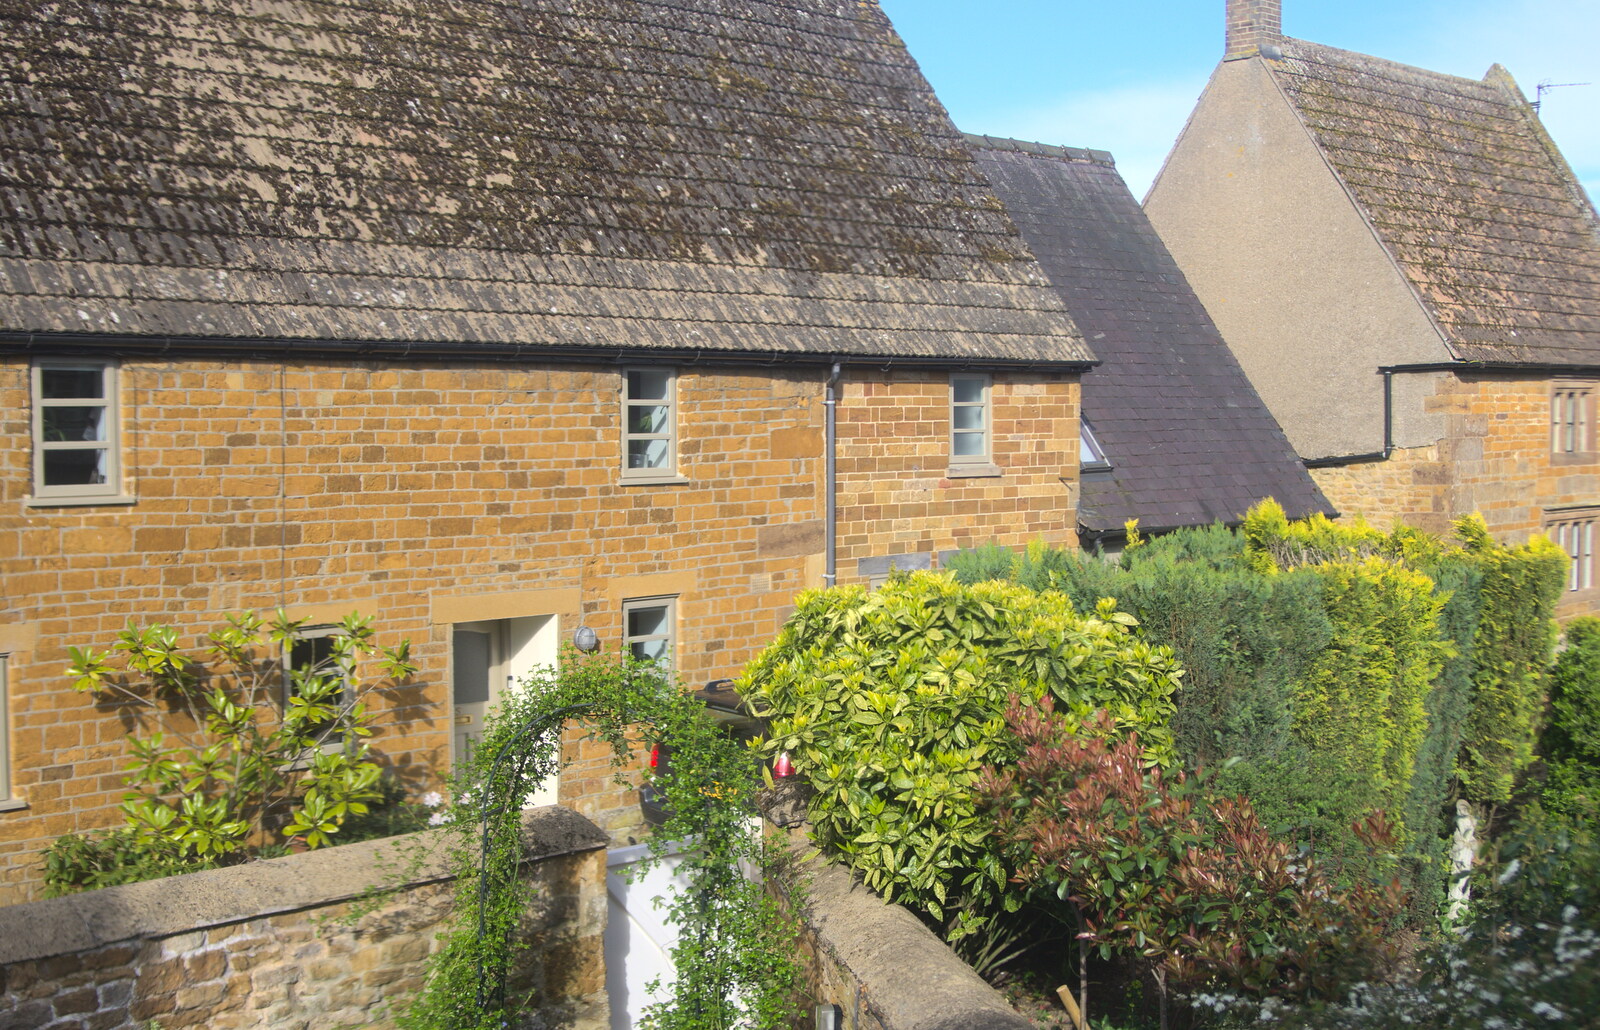 Honey-coloured cottages in Lyddington from The BSCC Weekend Away, Lyddington, Rutland - 9th May 2015